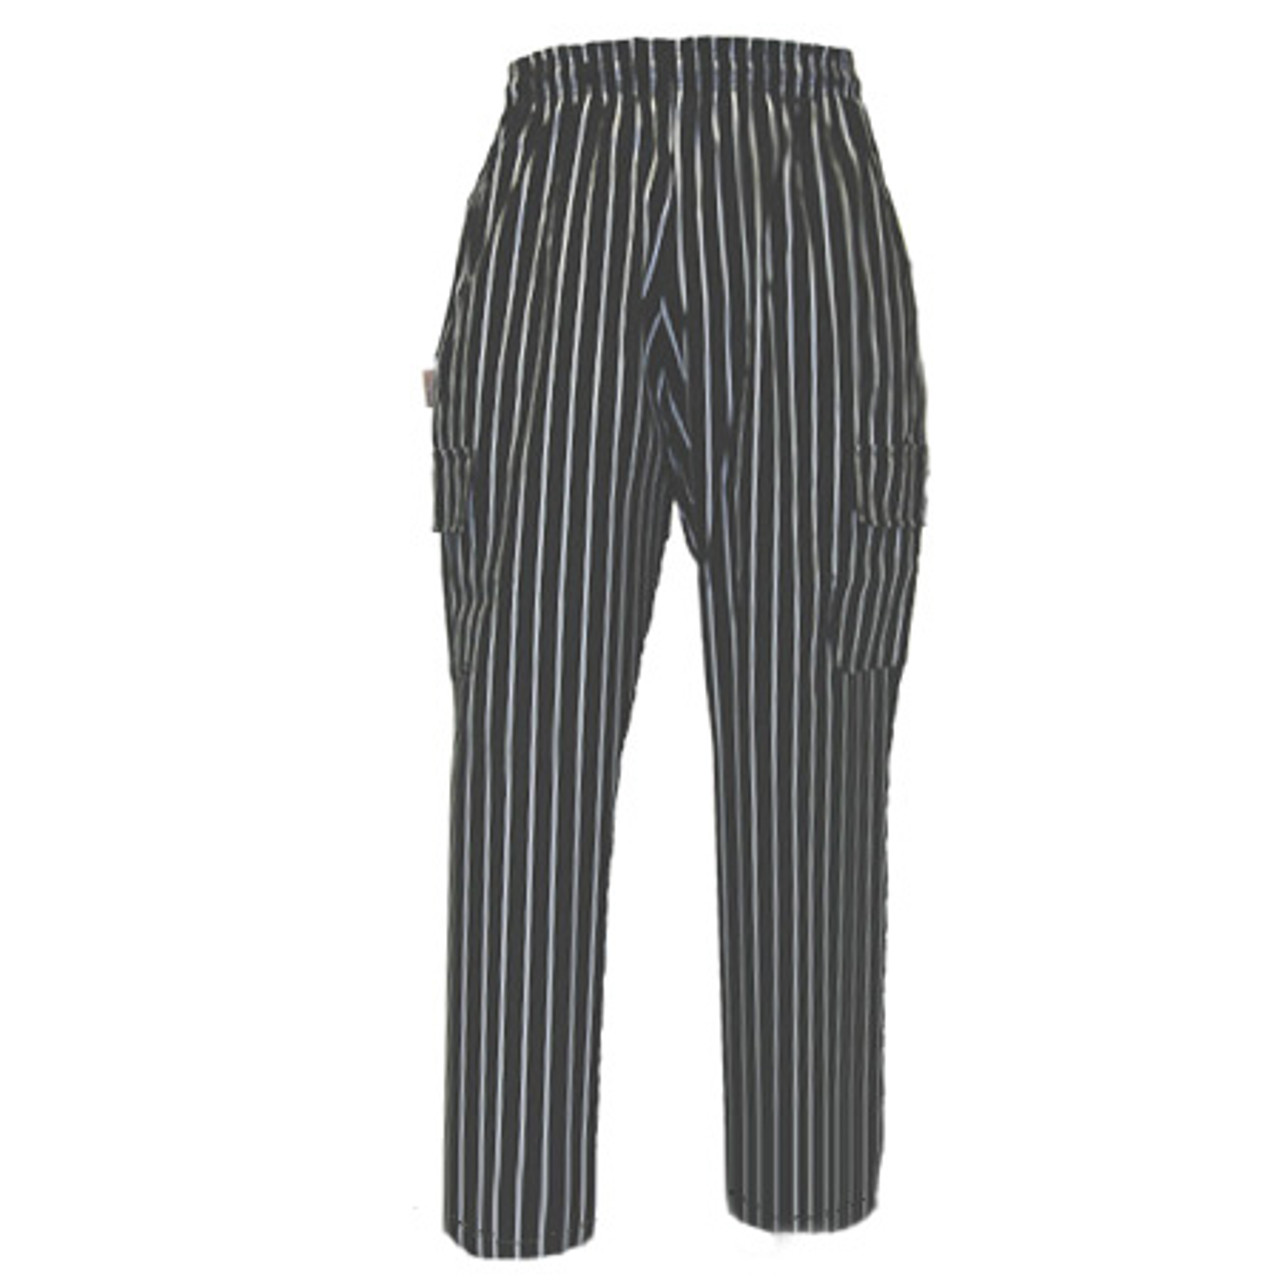 Cargo Chef Pants in 100% Cotton Big Black and White Pinstripe ...